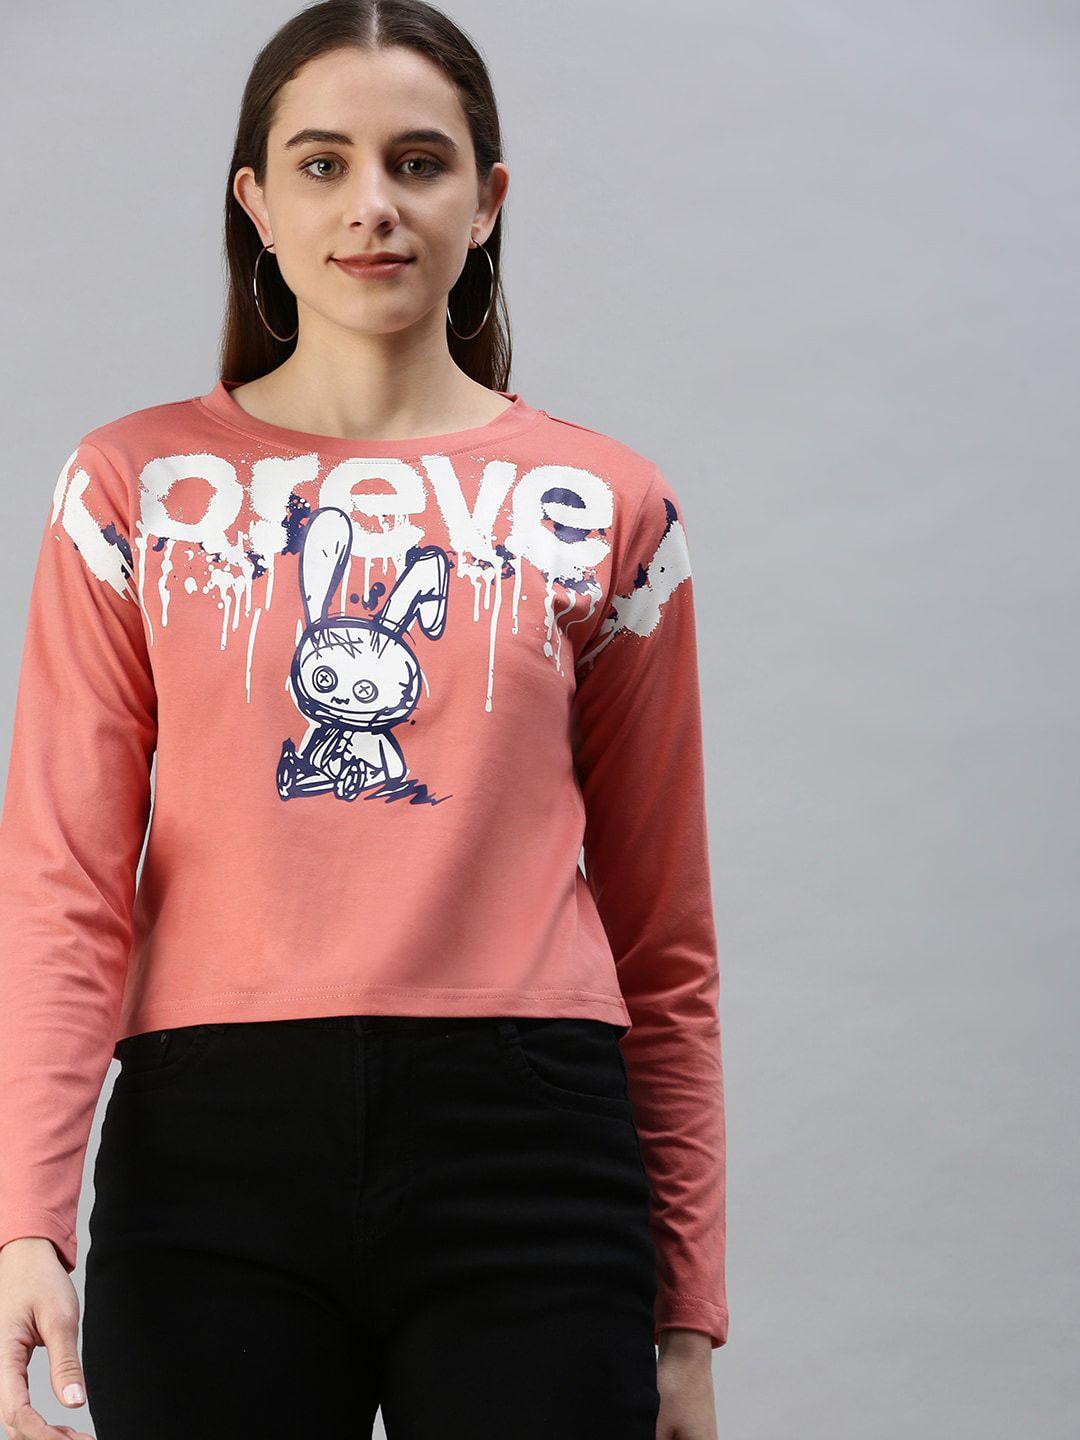 juneberry graphic printed long sleeves cotton crop top